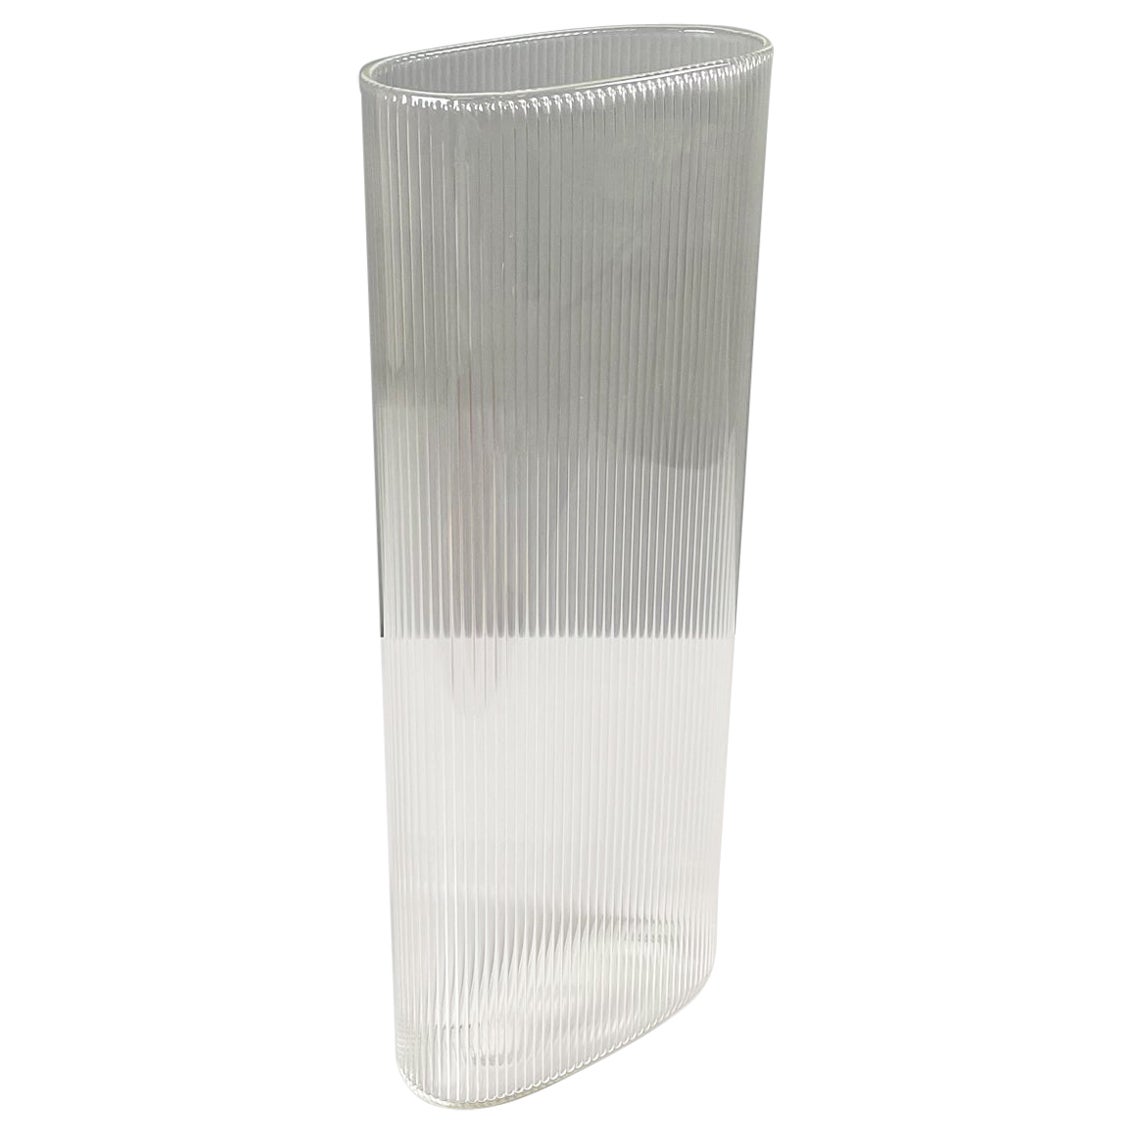 Italian modern Glass vase with oval shape by Roberto Faccioli, 1990s For Sale